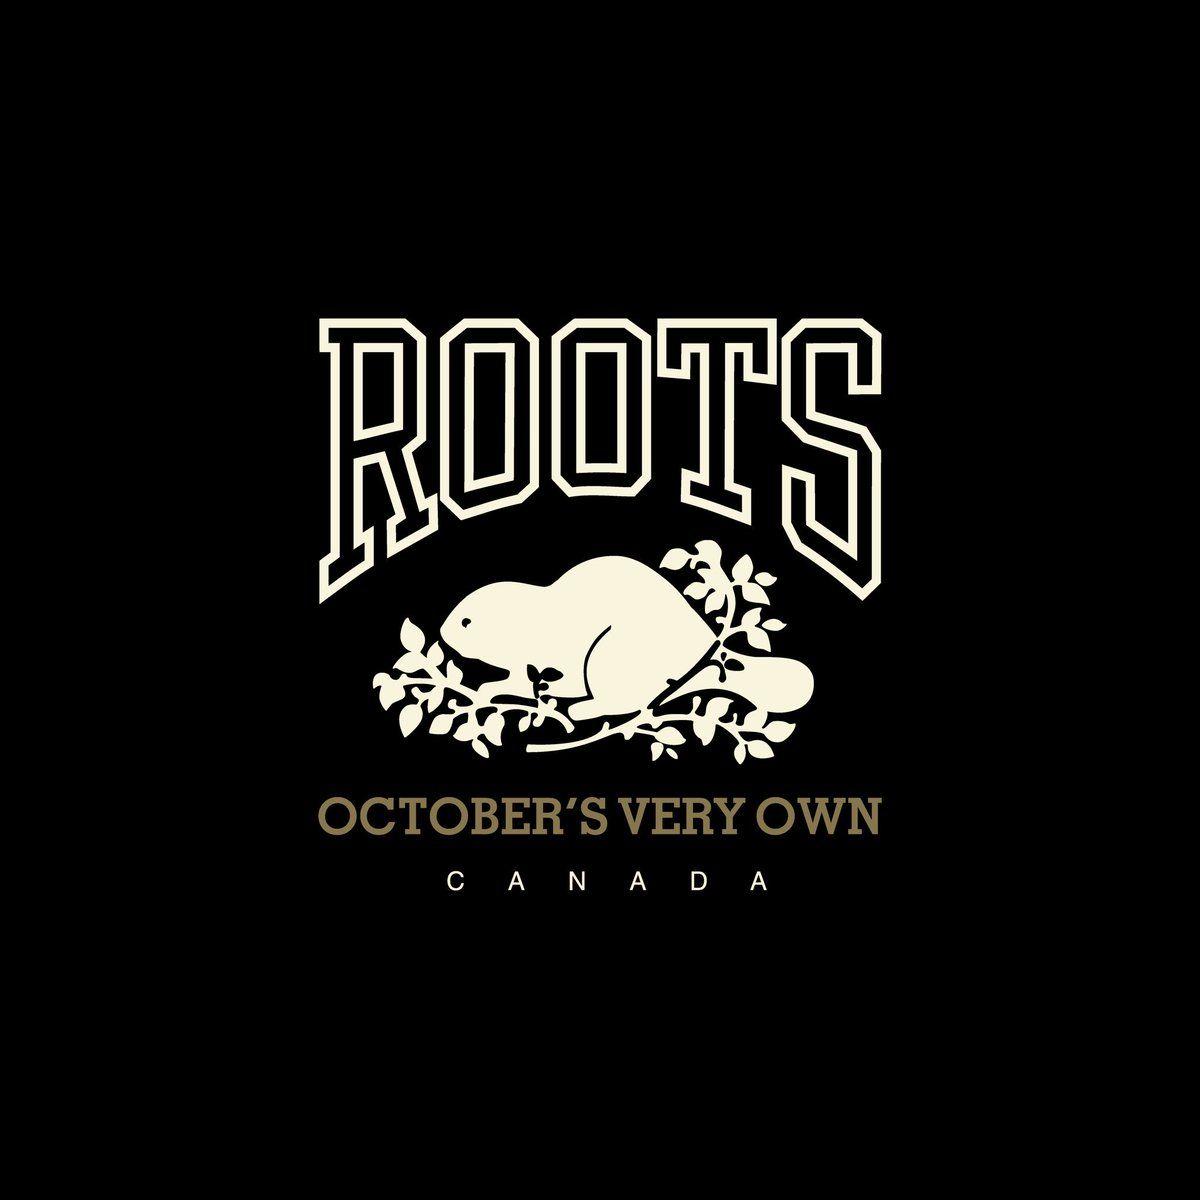 October's Very Own Logo - October's Very Own x Roots 2016